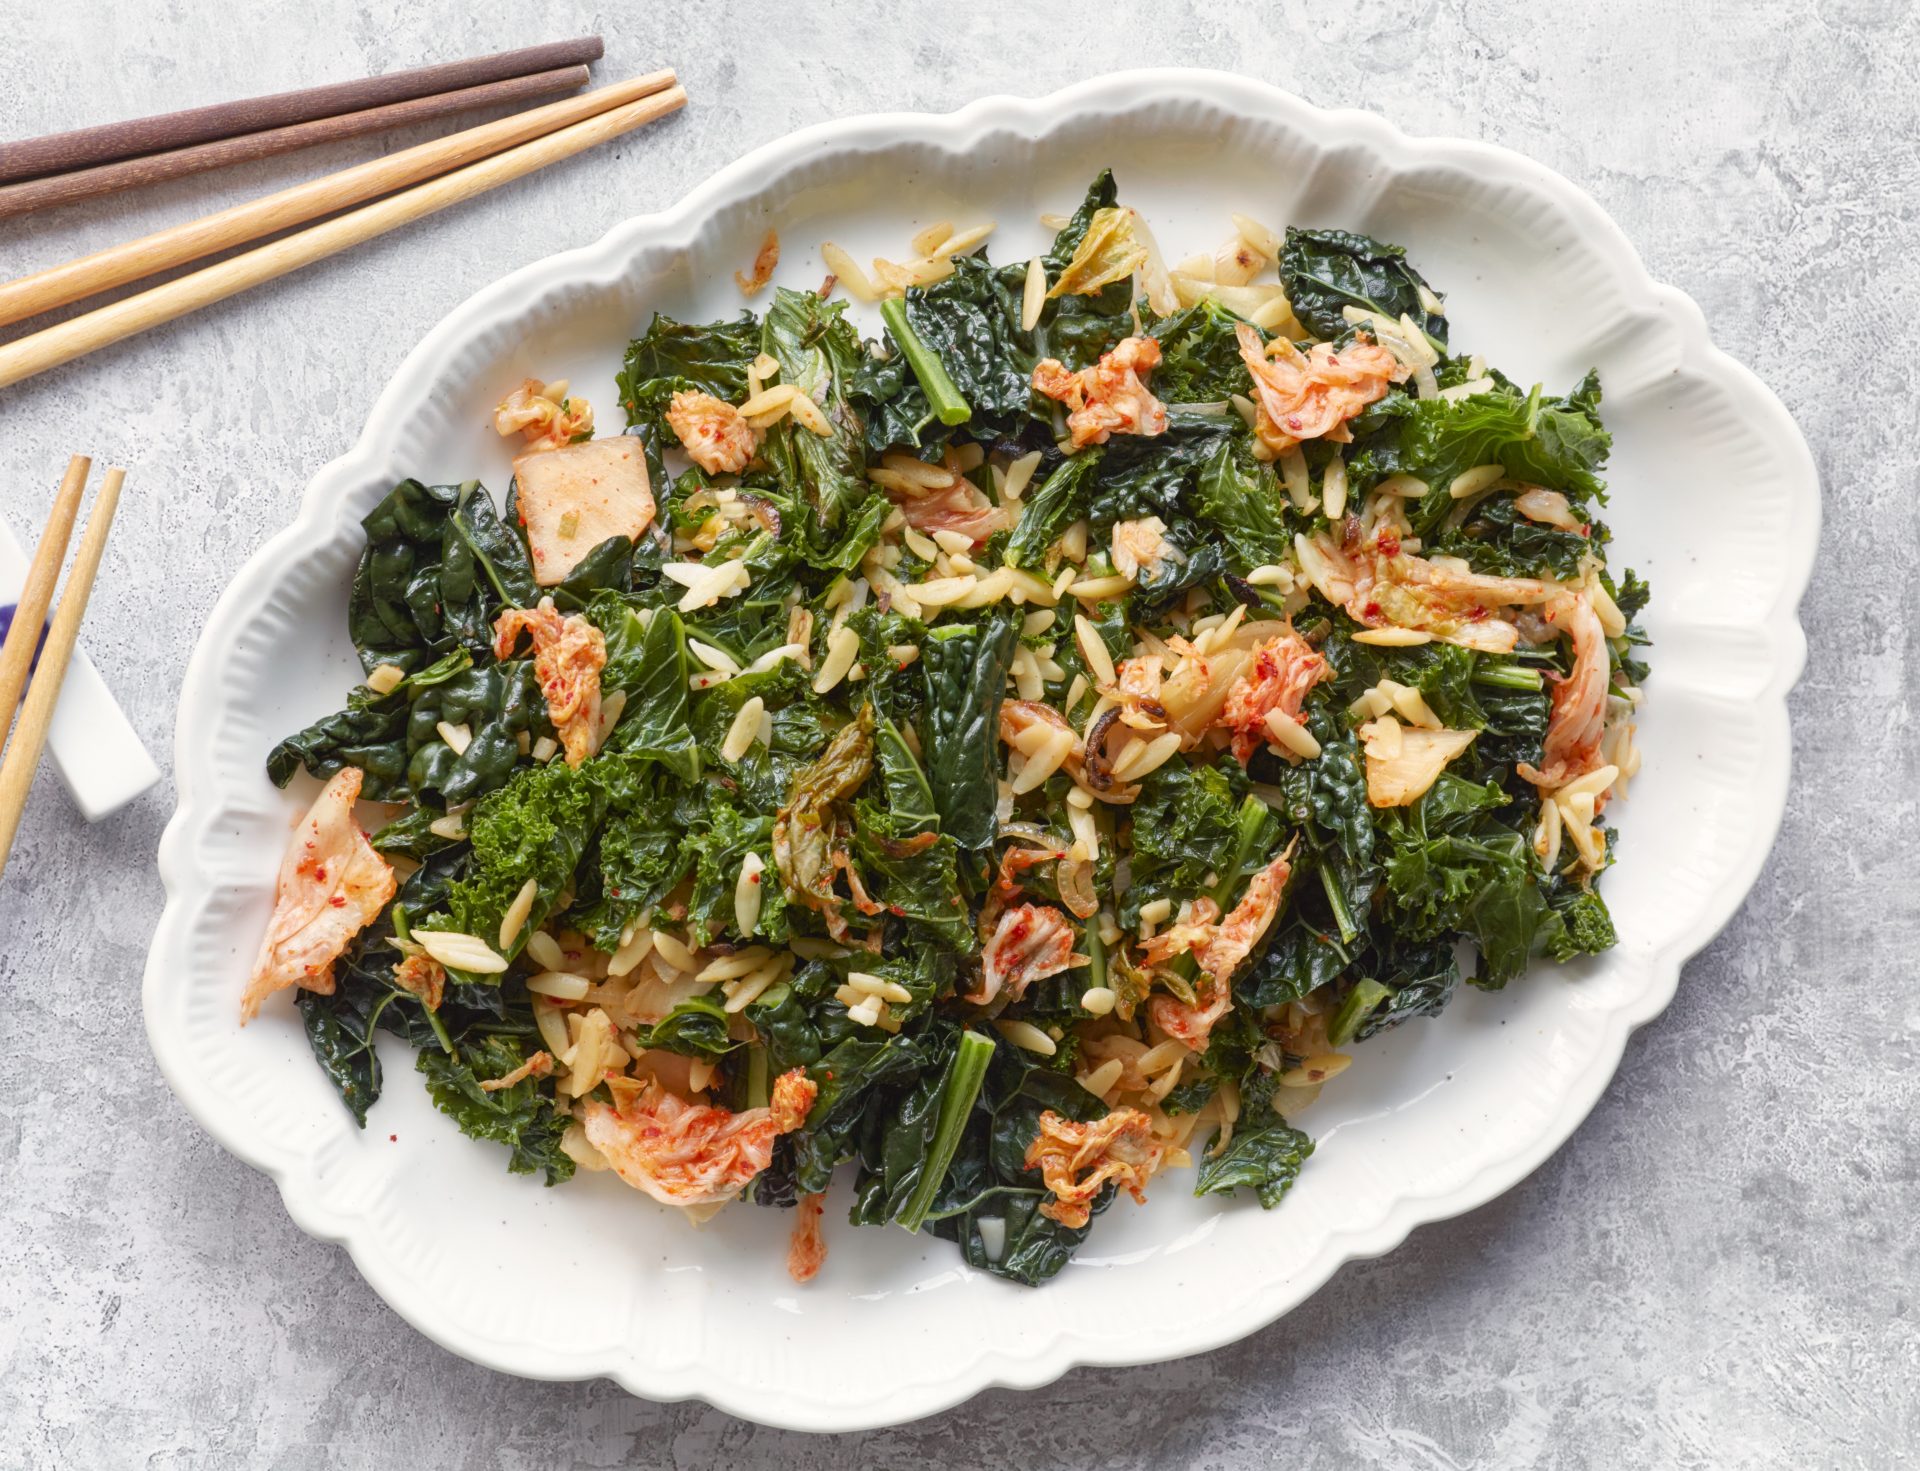 This Vietnamese kale rice dish with ginger and kimchi is the ultimate gut-loving, immunity-supporting lunch